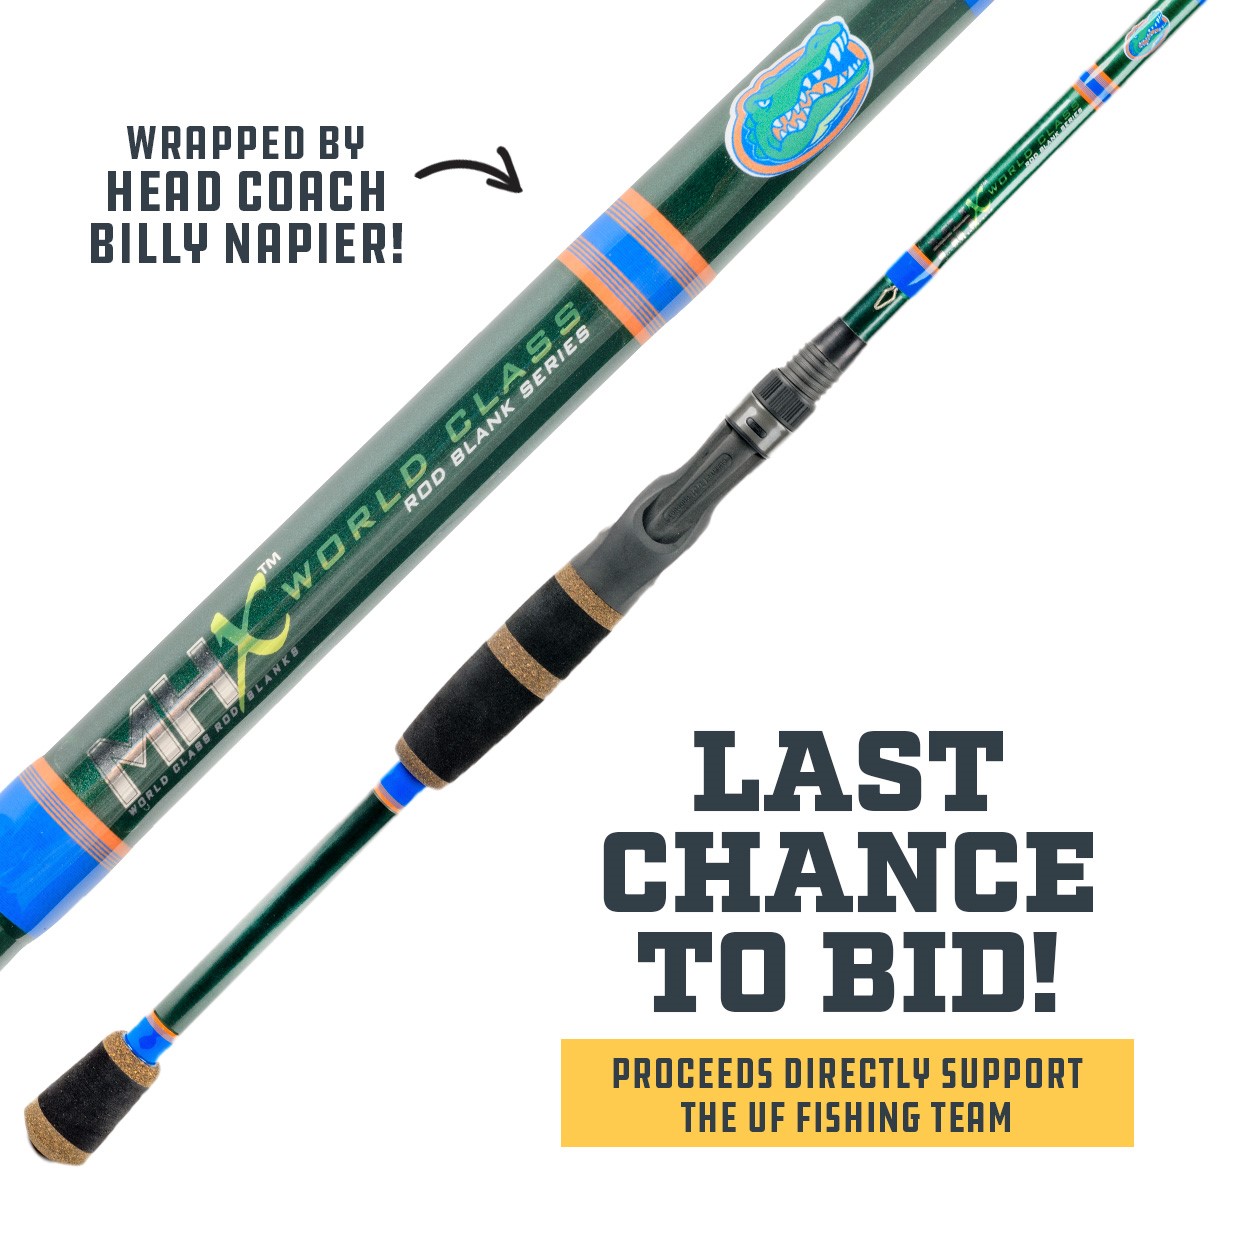 Last Chance for the Gator Rod Auction! - Mud Hole Tackle